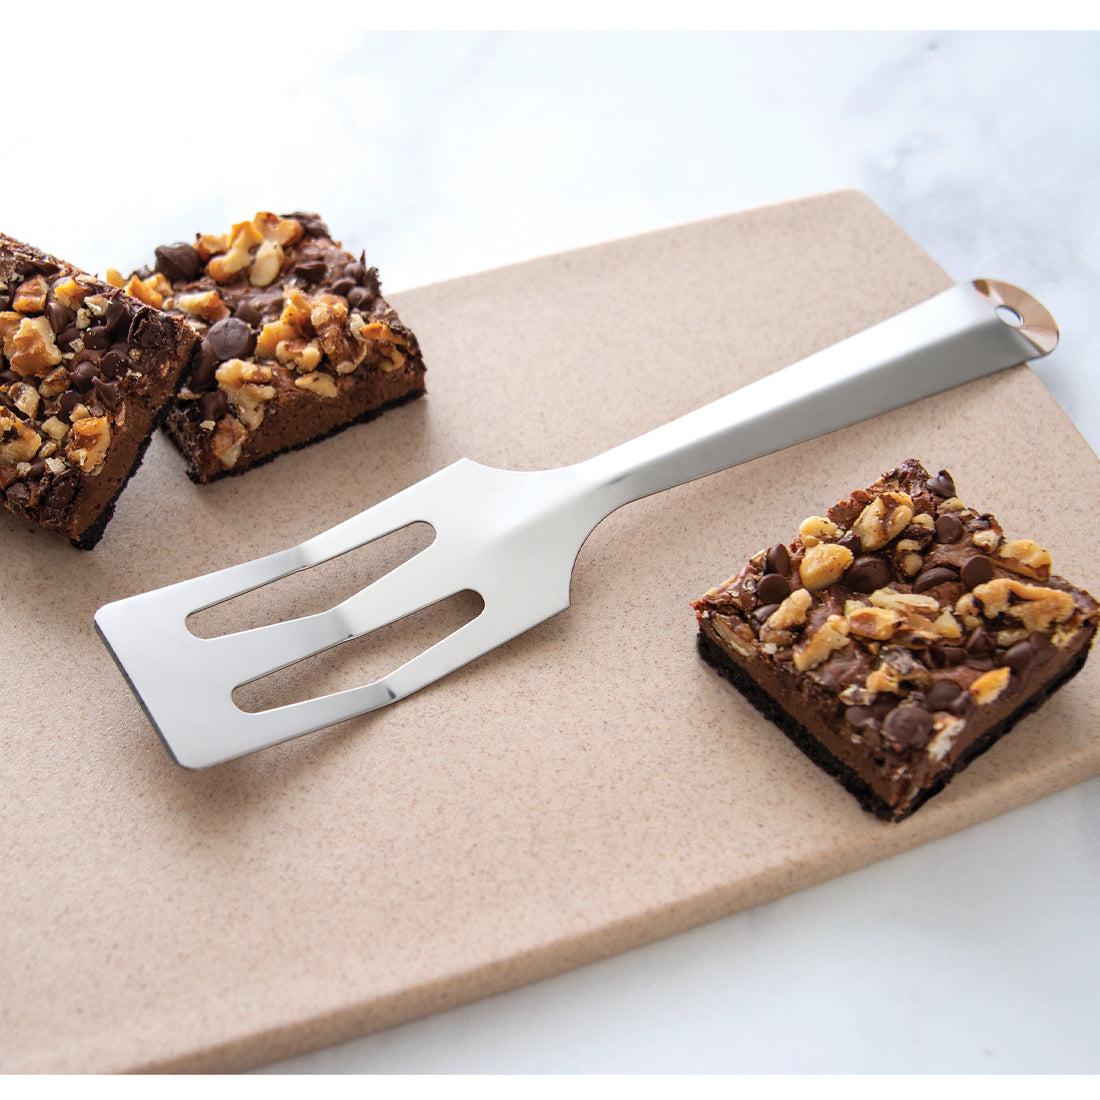 Top 10 New Products from Pampered Chef this Fall - Midwest Goodness